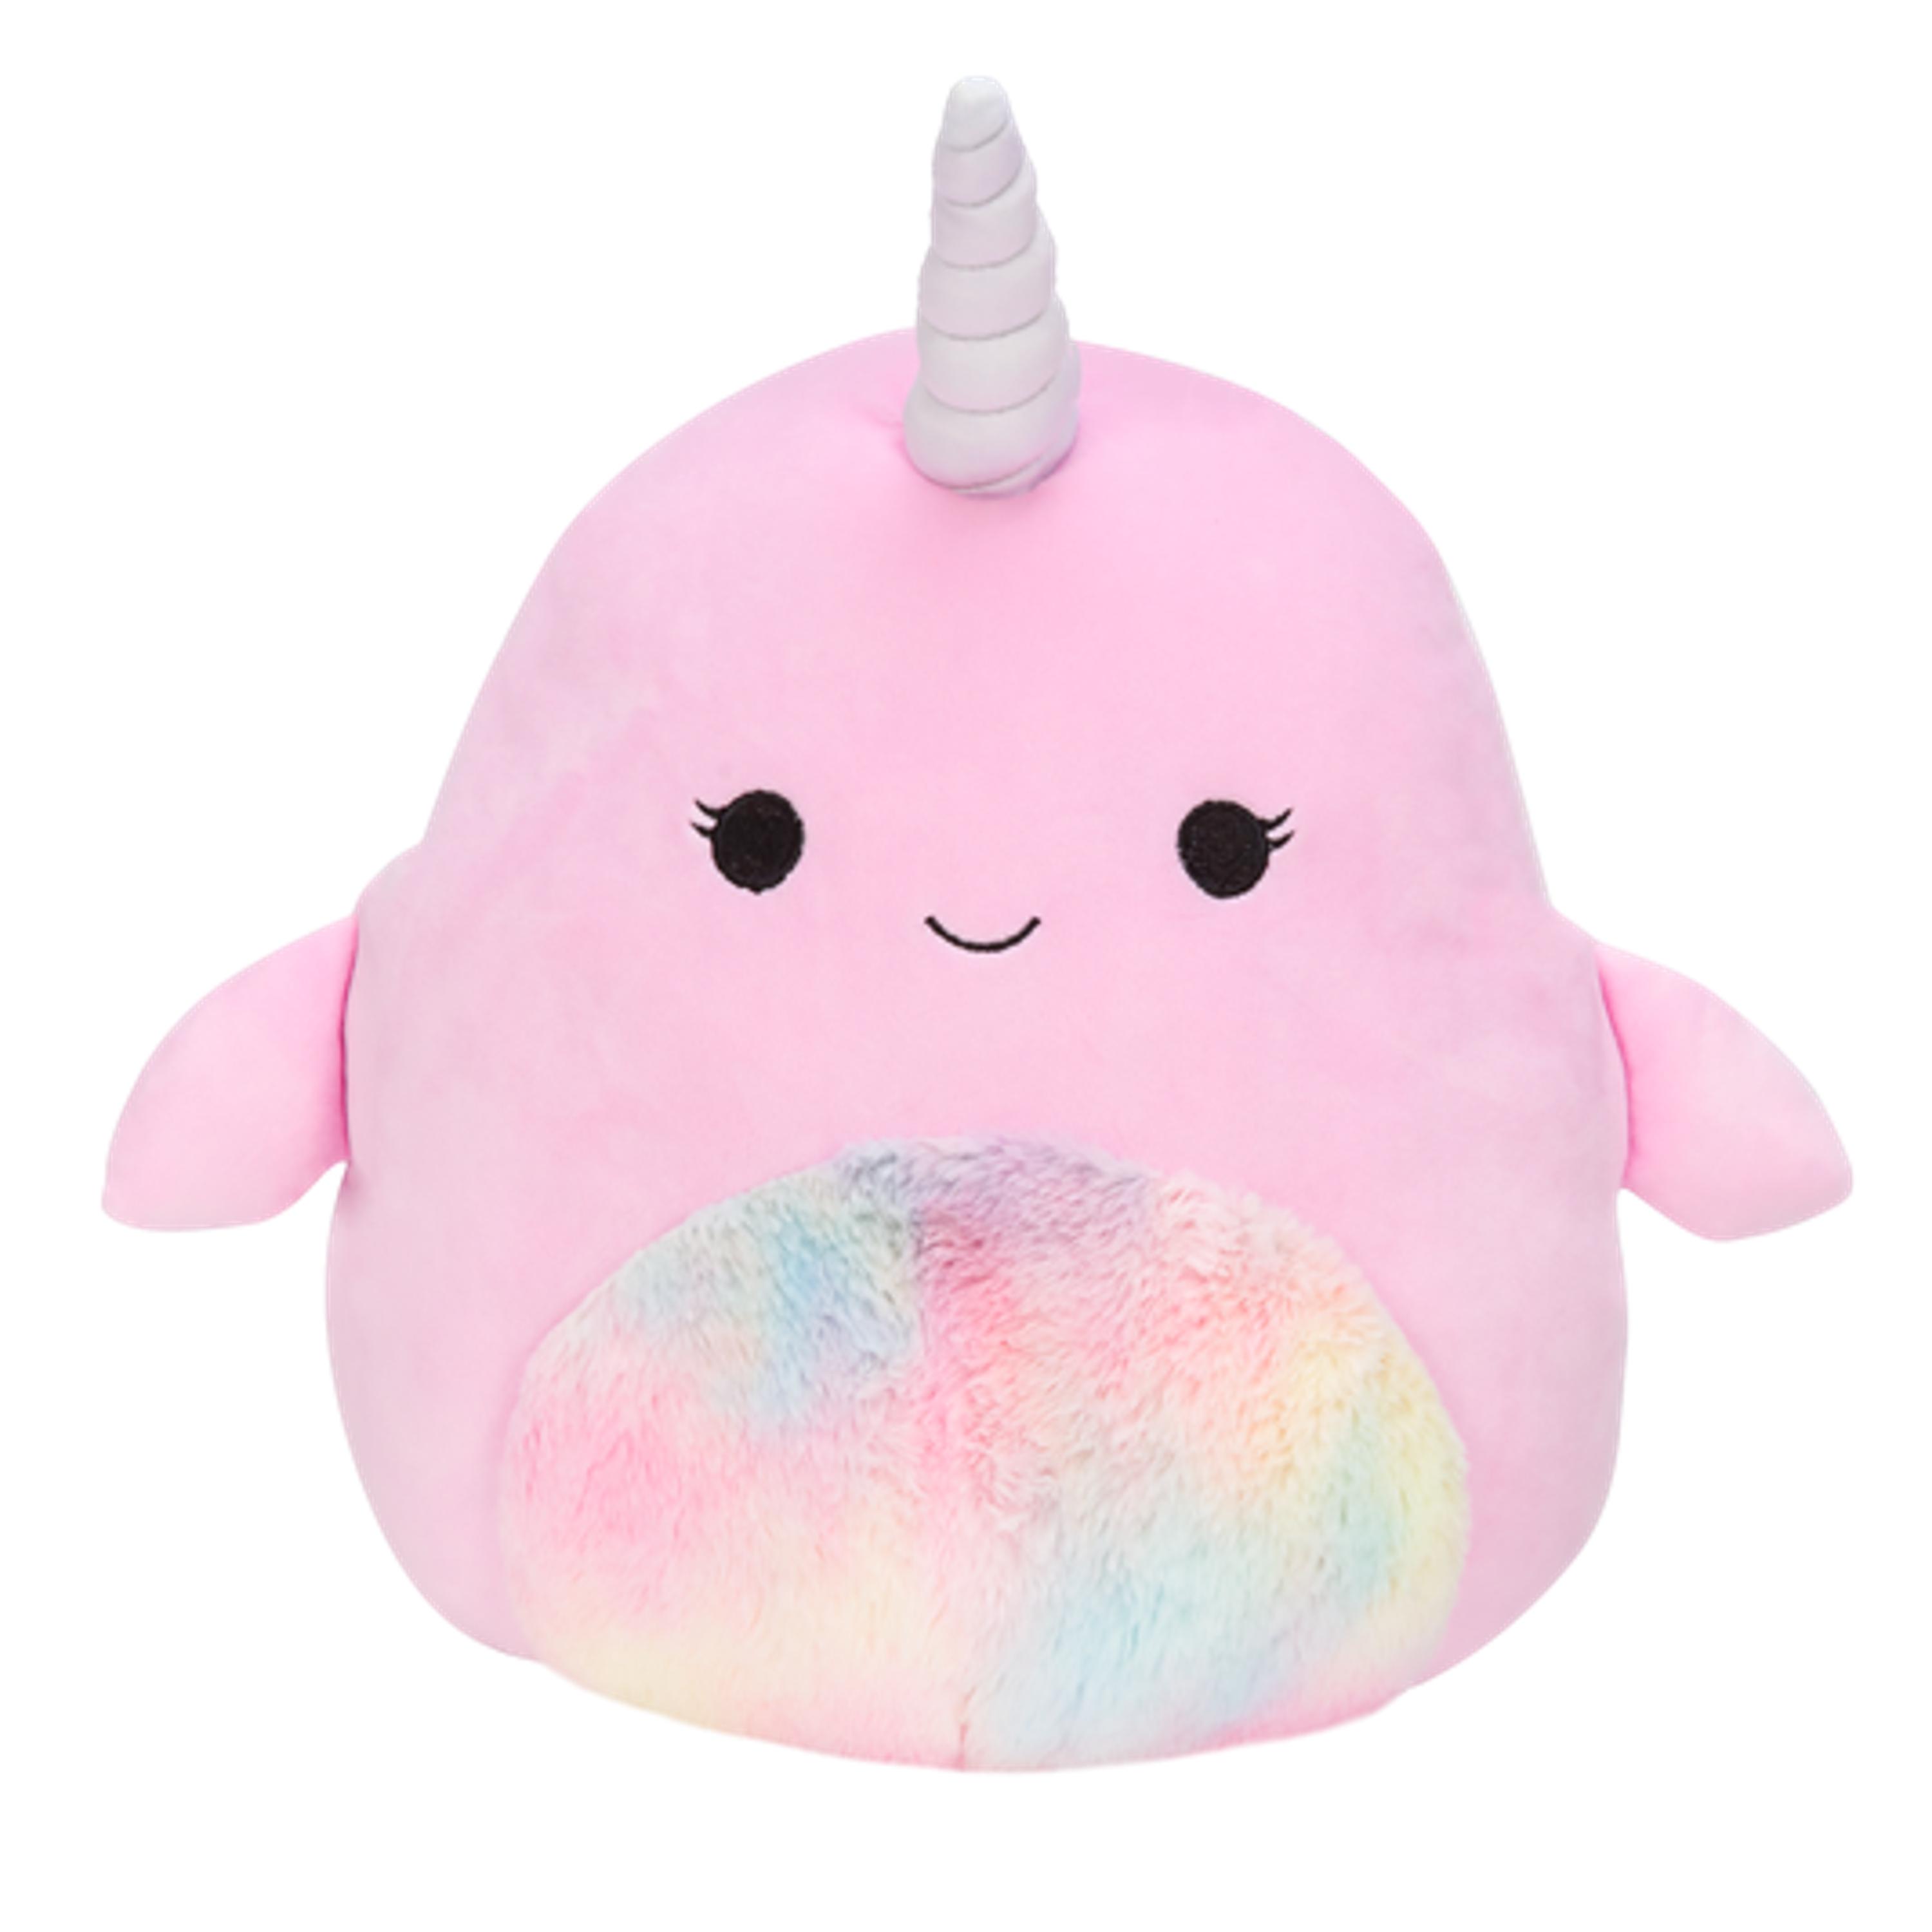 Squishmallows - 30 cm Plush P8 - Pink Narwhal (2112PN8)